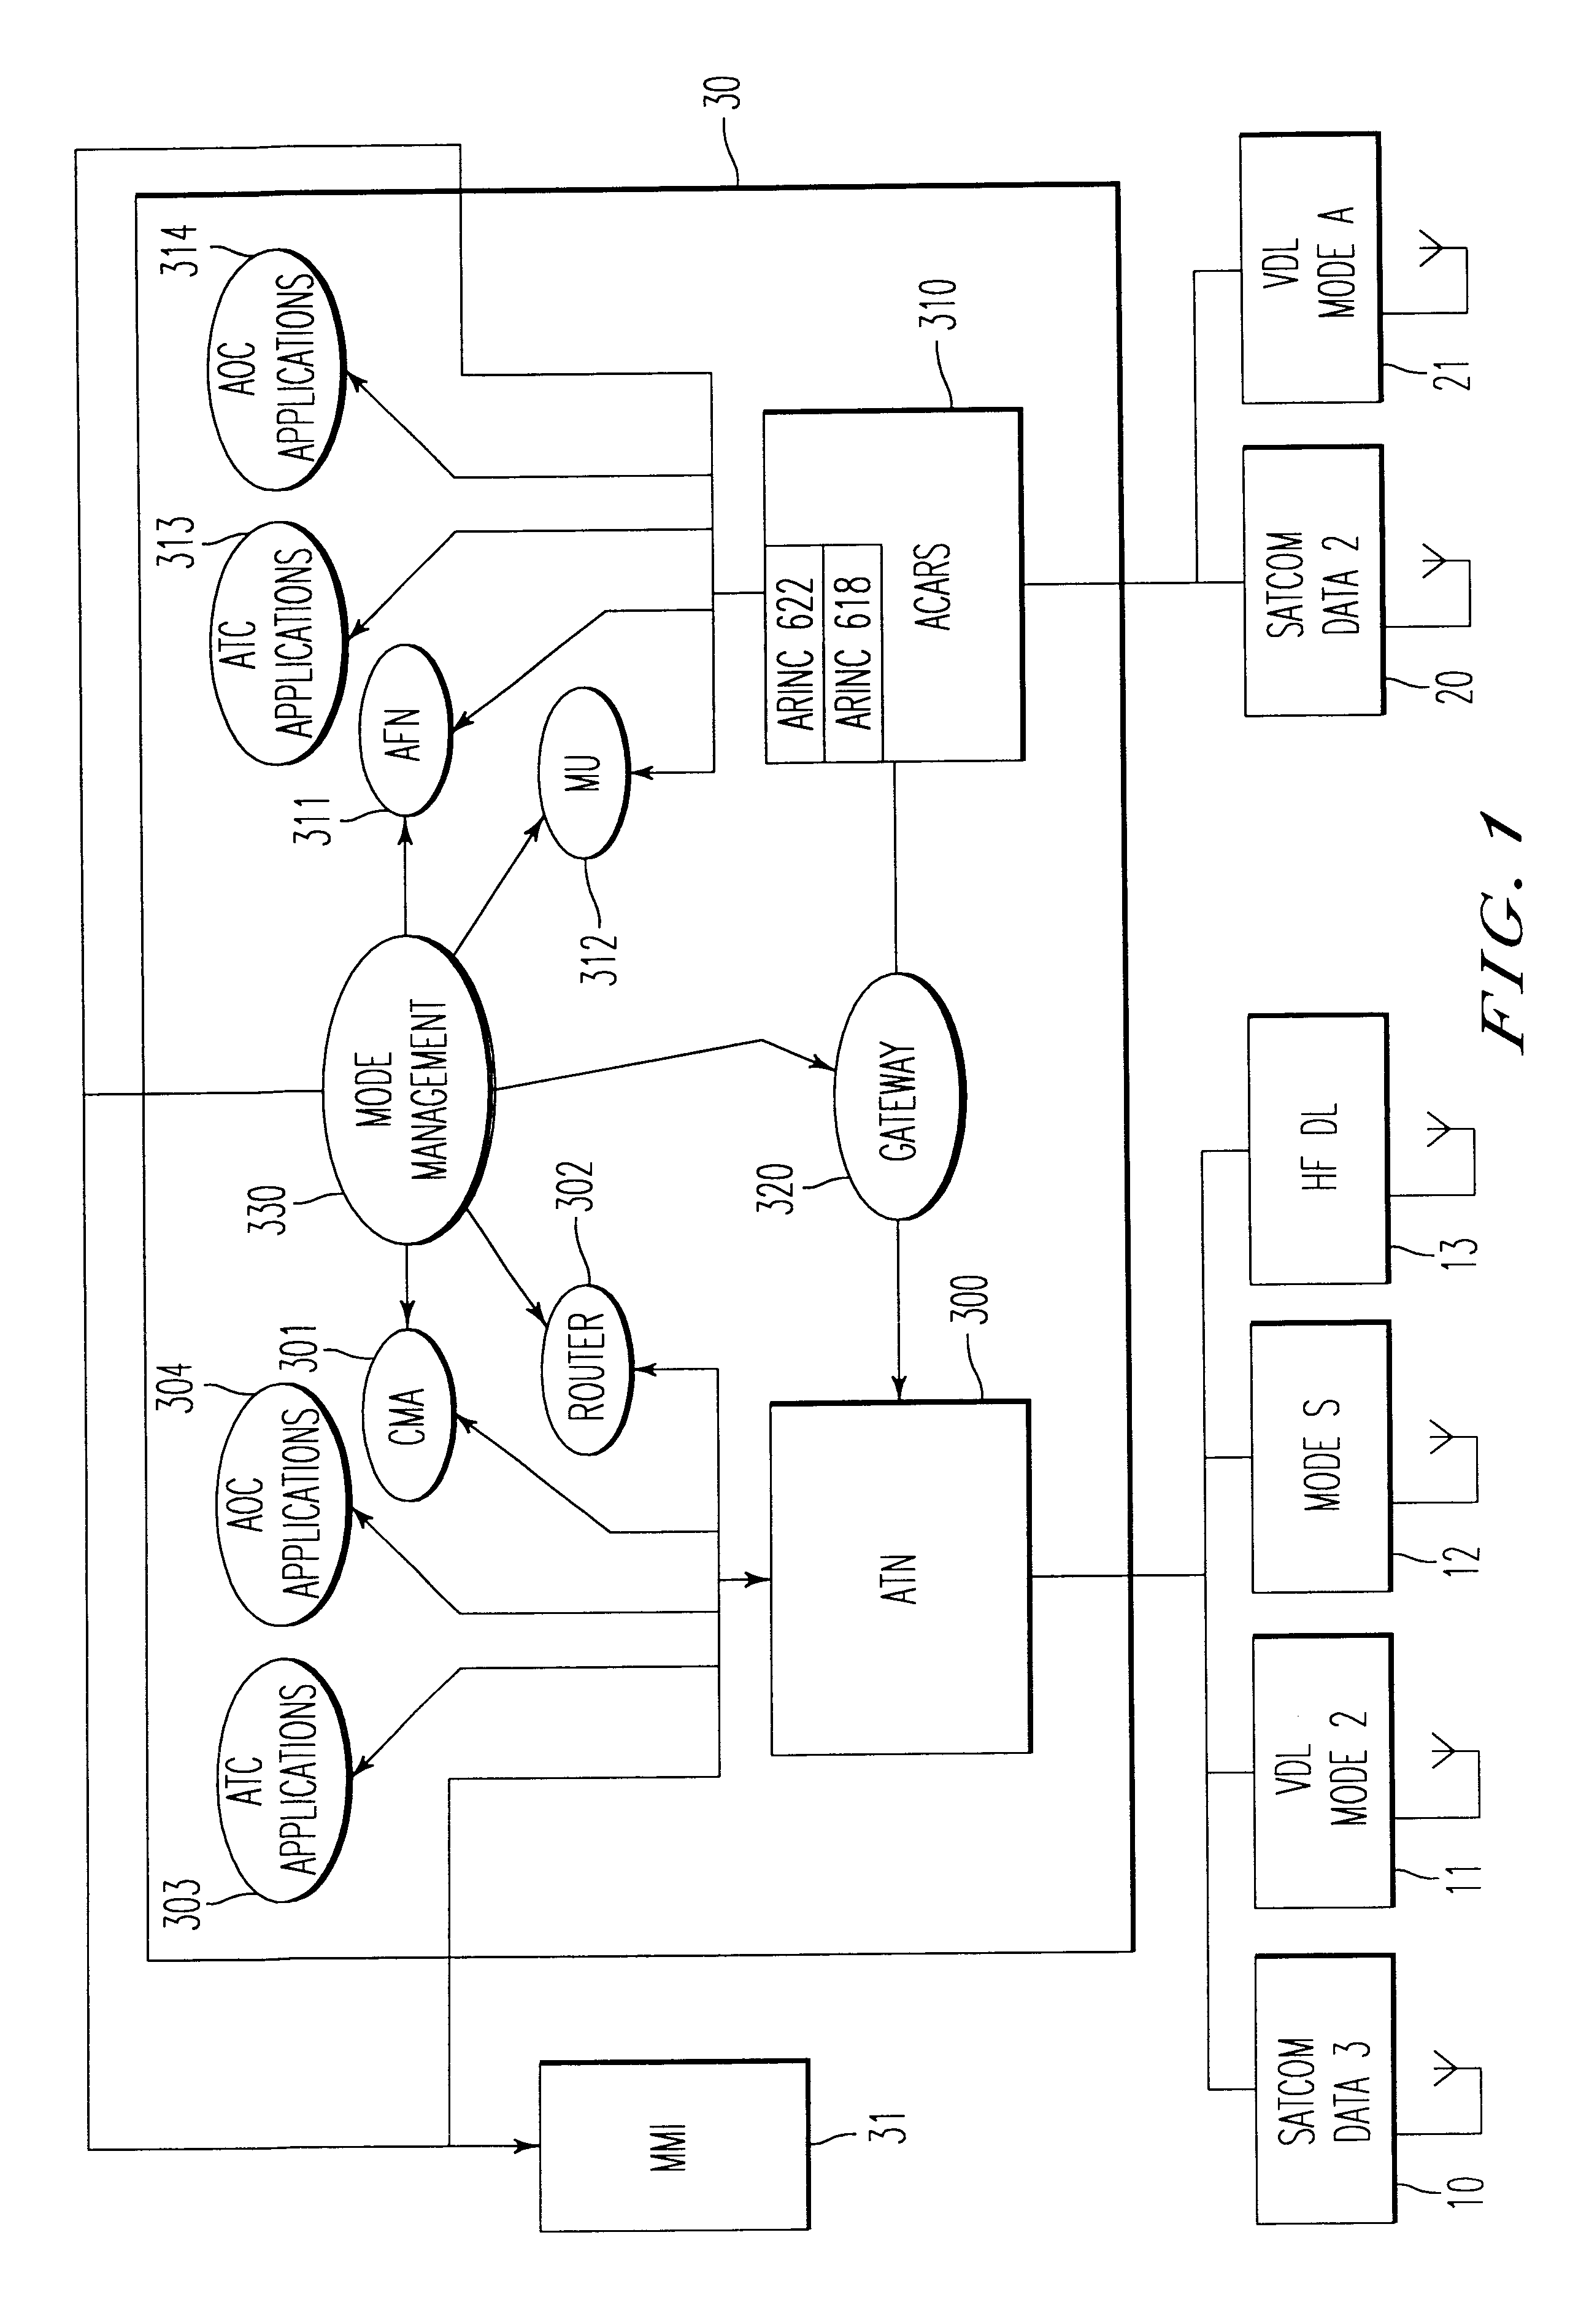 Method for managing communication modes for an aircraft